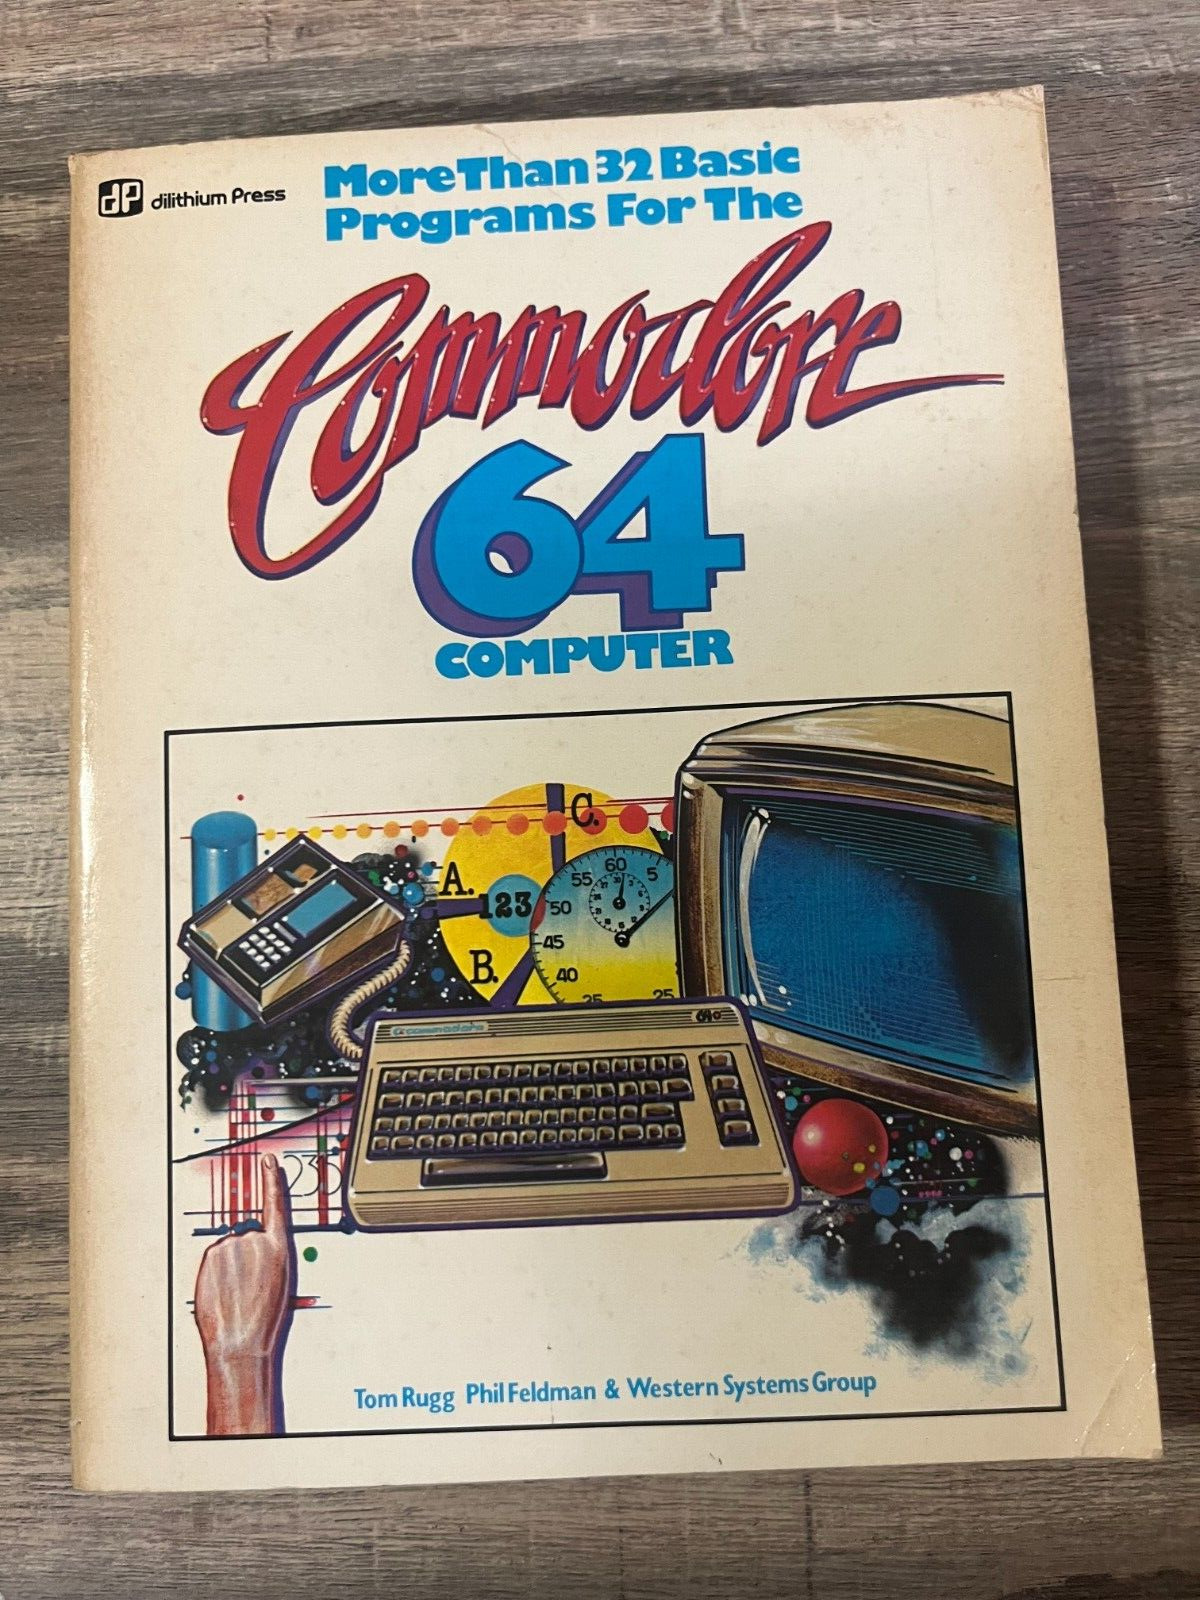 G2 - More Than 32 Basic Programs For The Commodore 64 Computer Book VINTAGE 1983